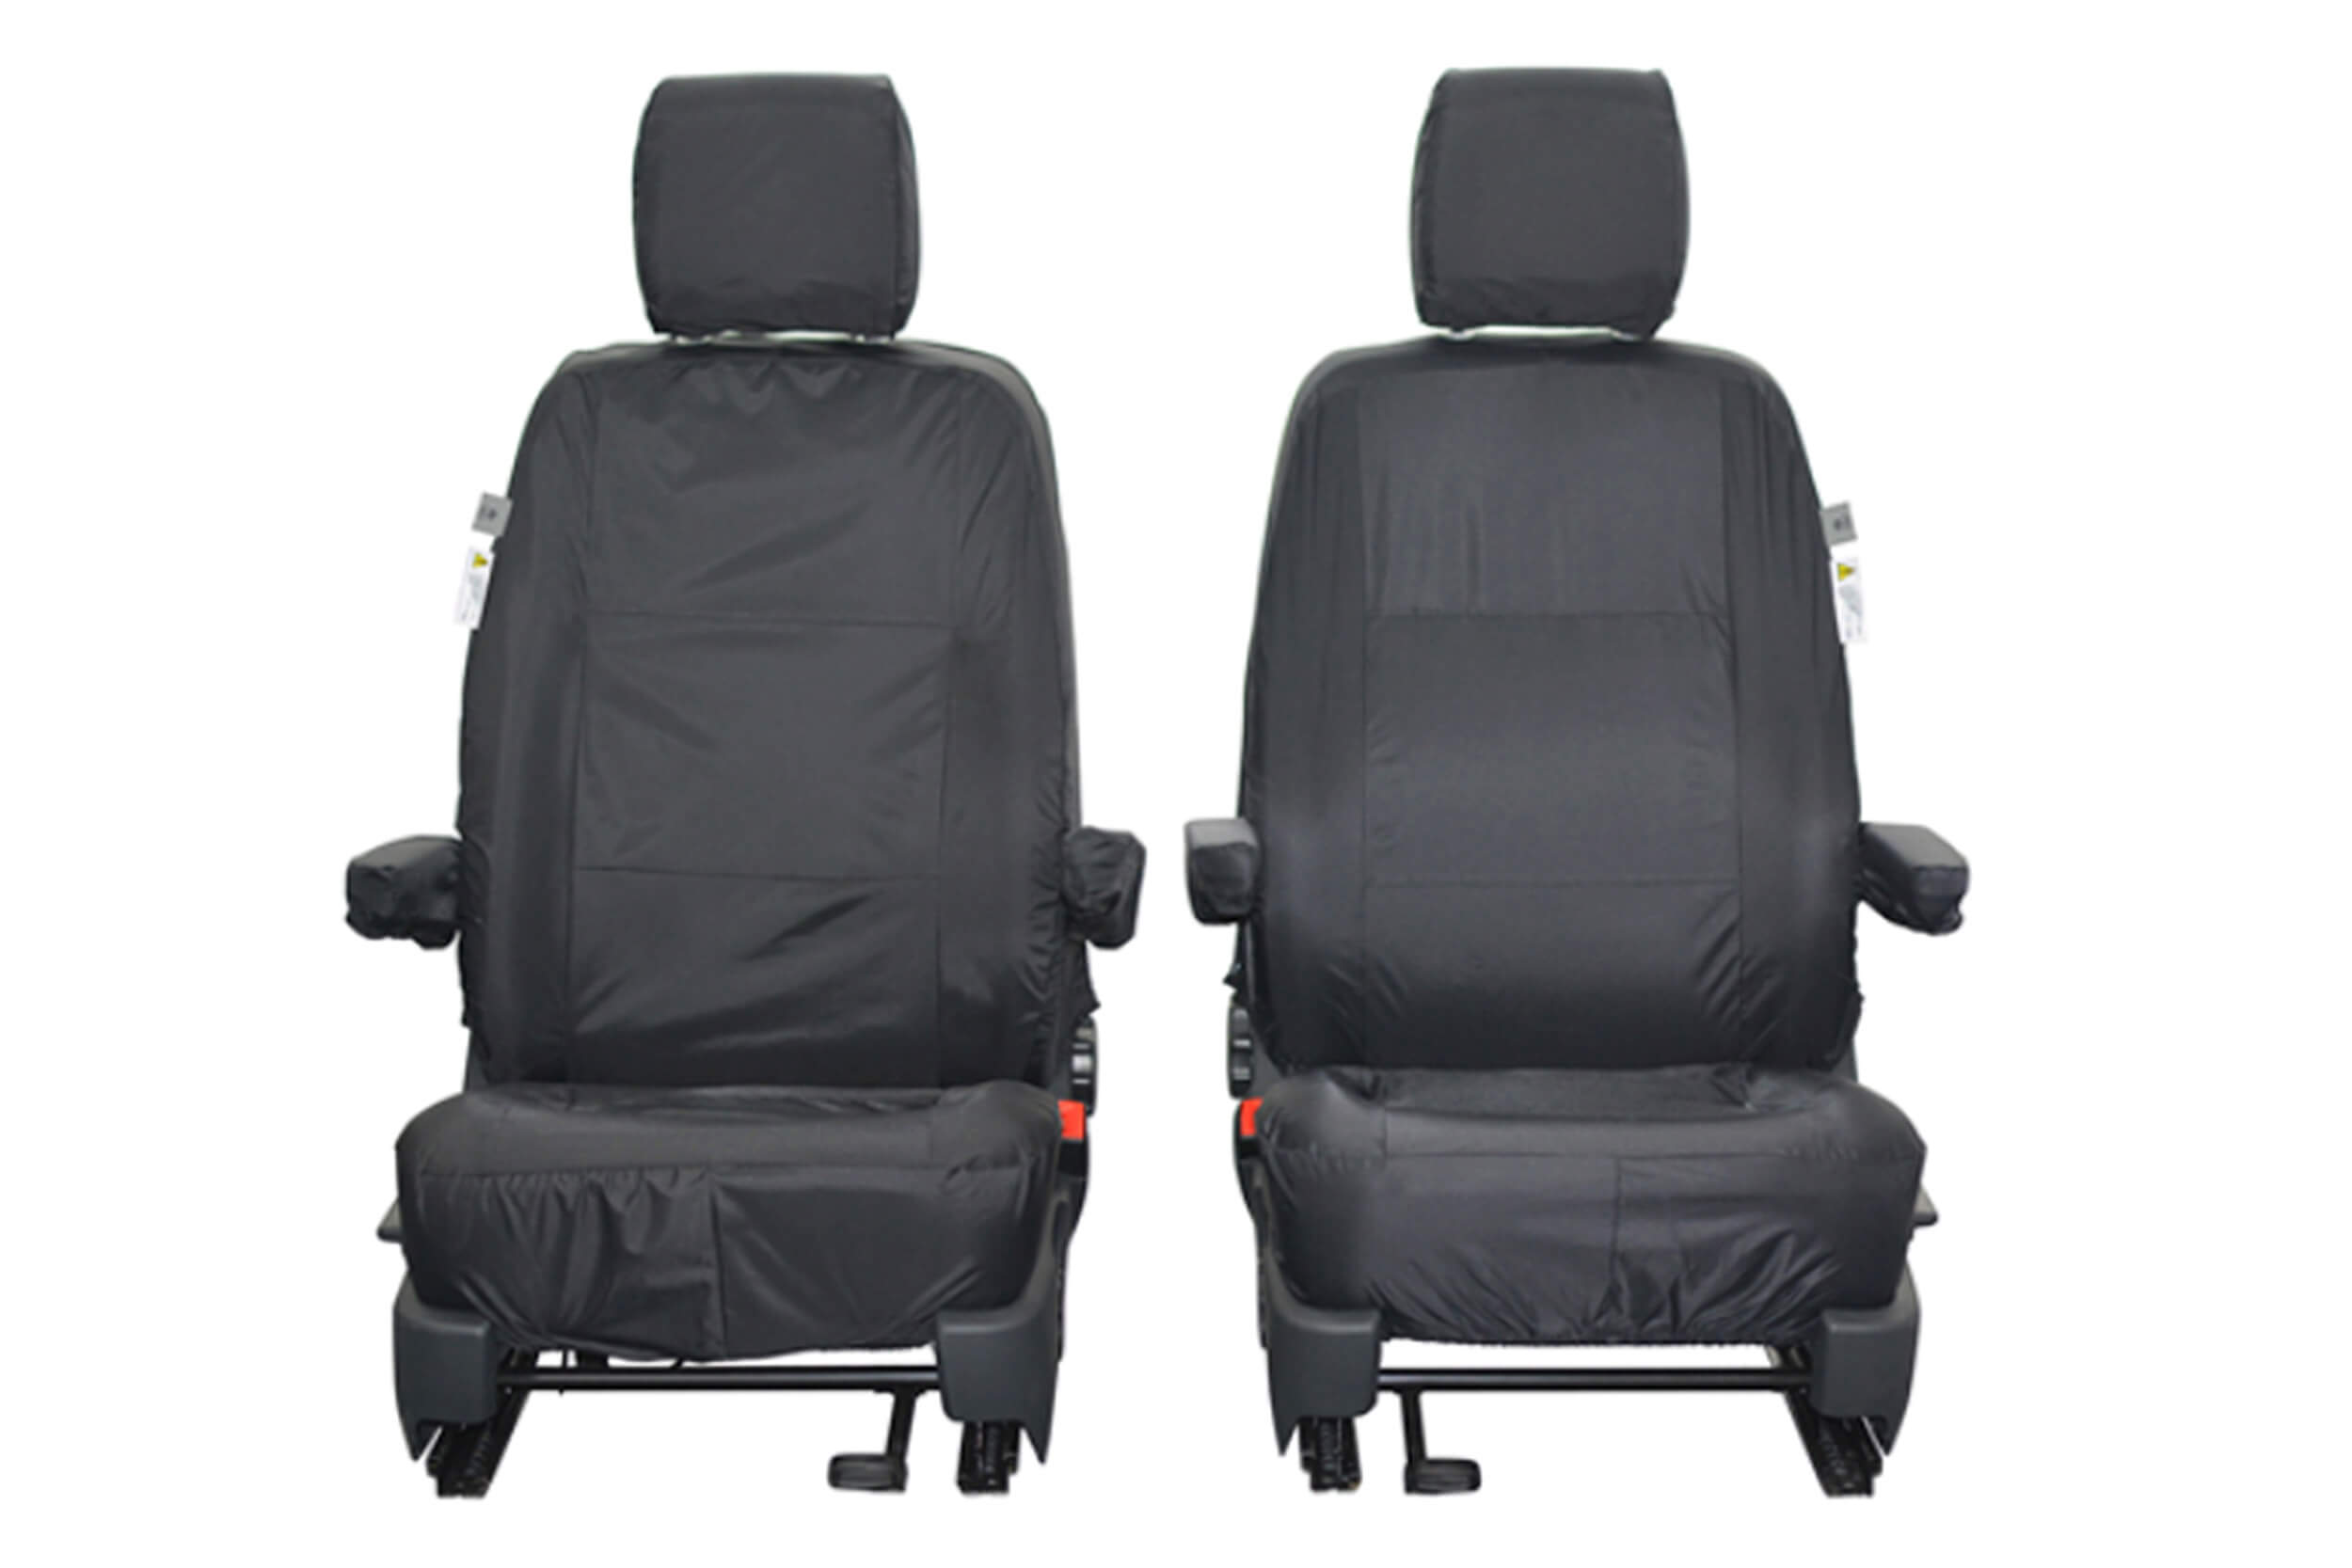 Seat Covers Seat Covers Set EV for VW T5 Transporter Fabric Dark Grey